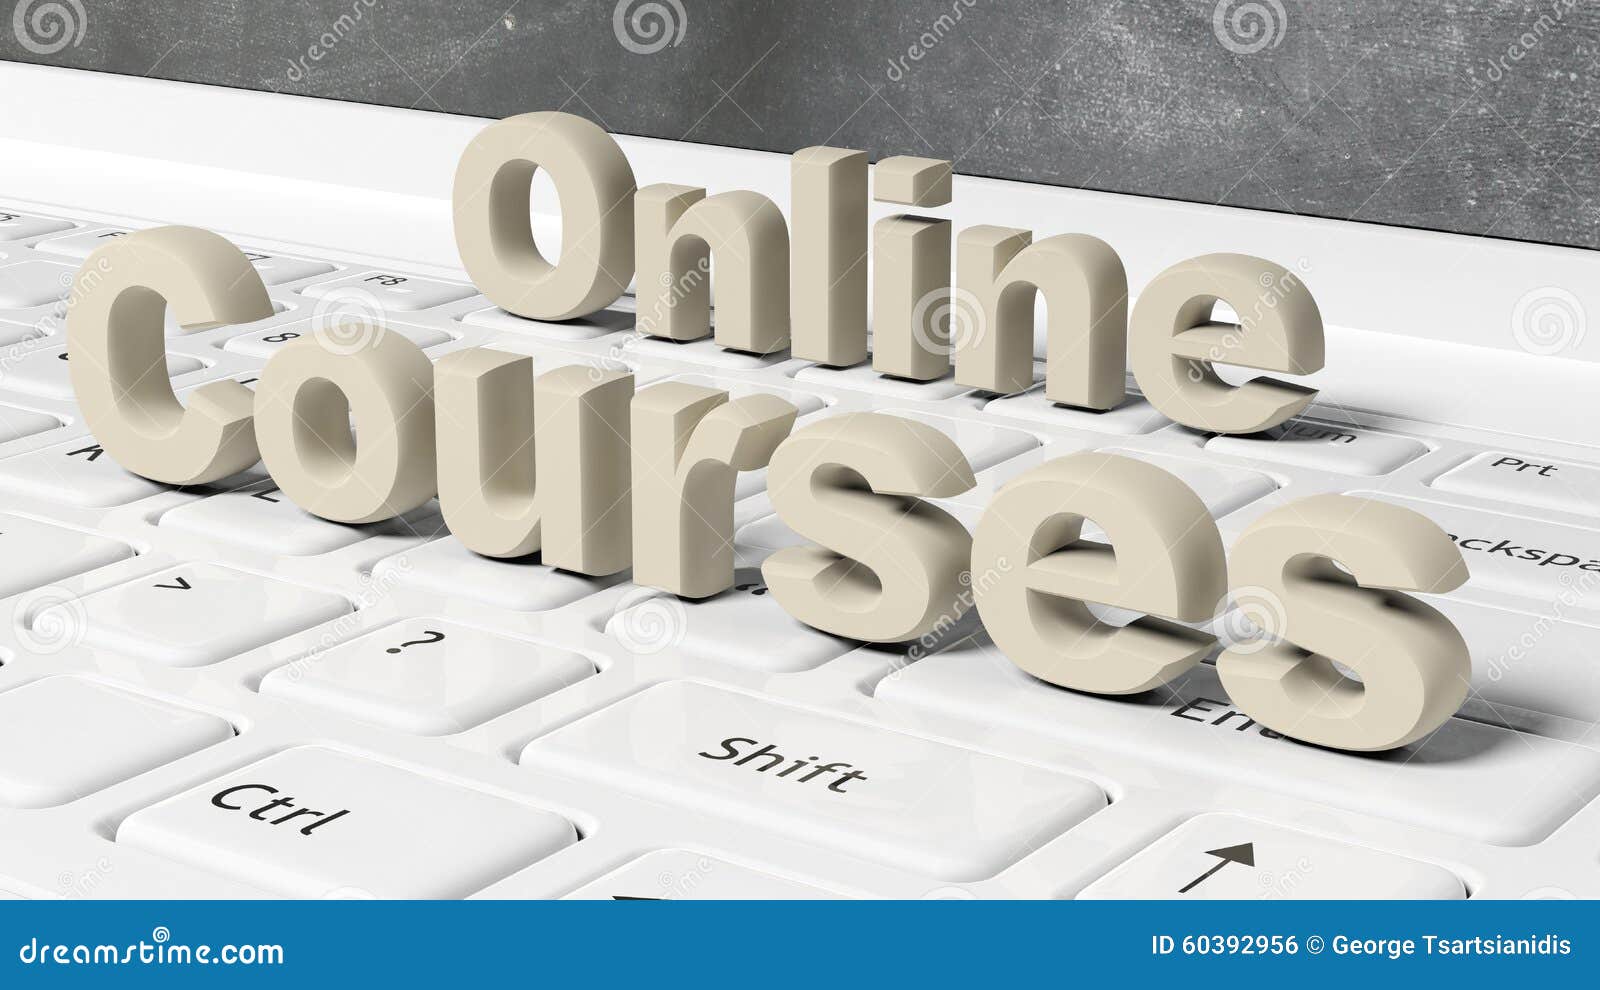 online courses 3d text on laptop keyboard